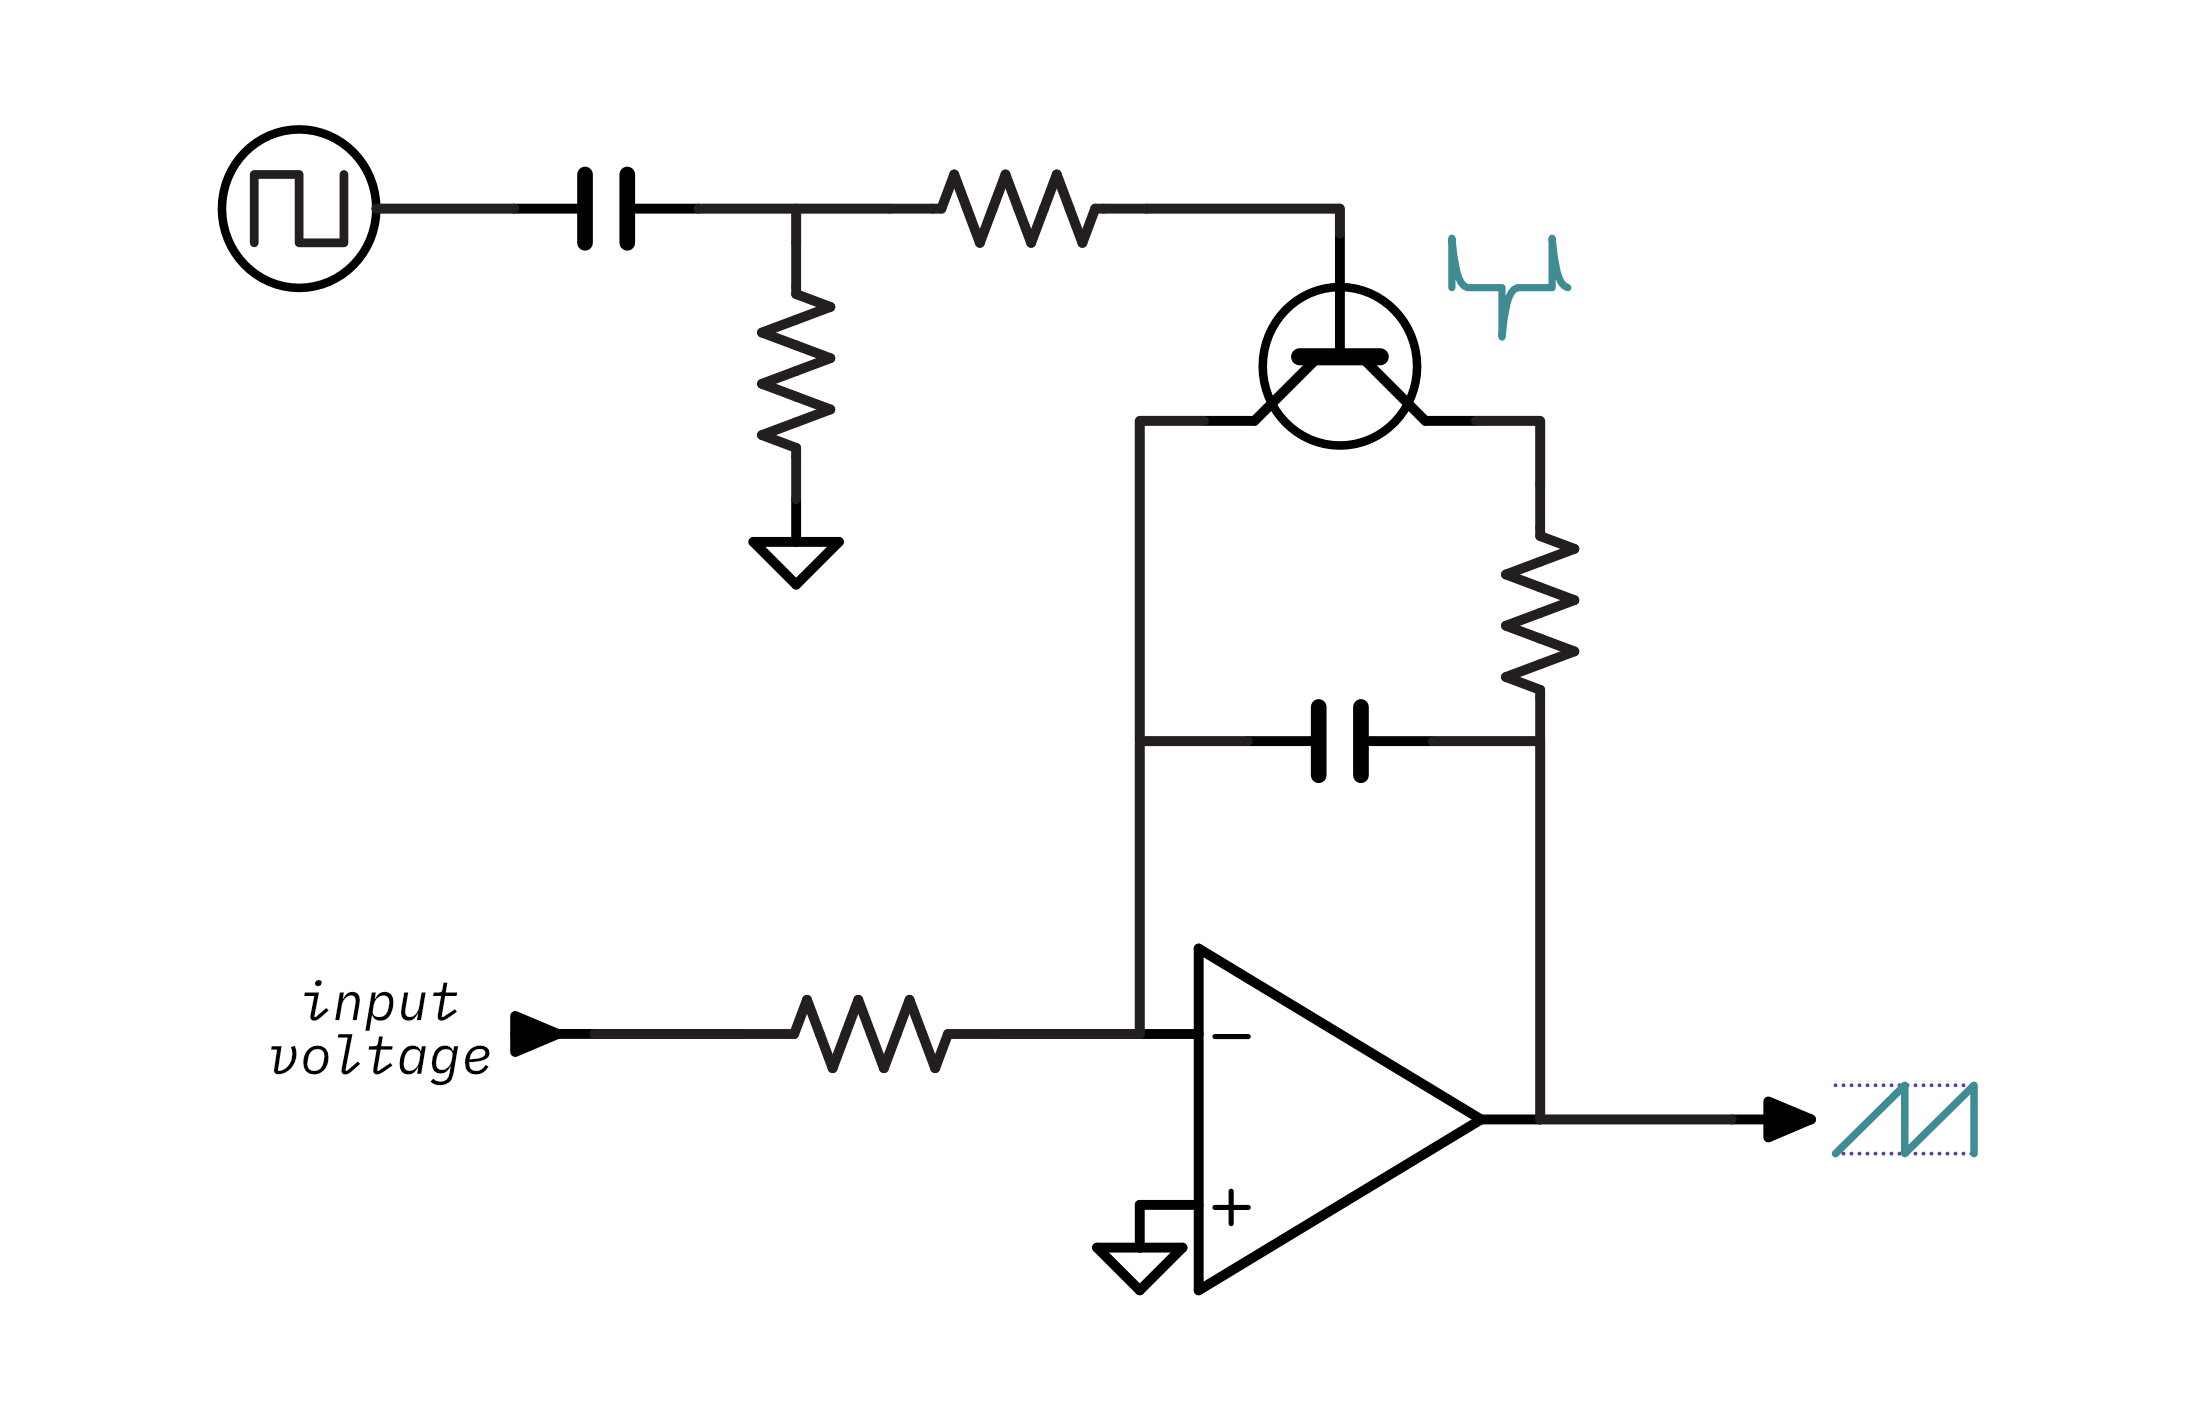 Schematic of the DCO with the RC differentiator added